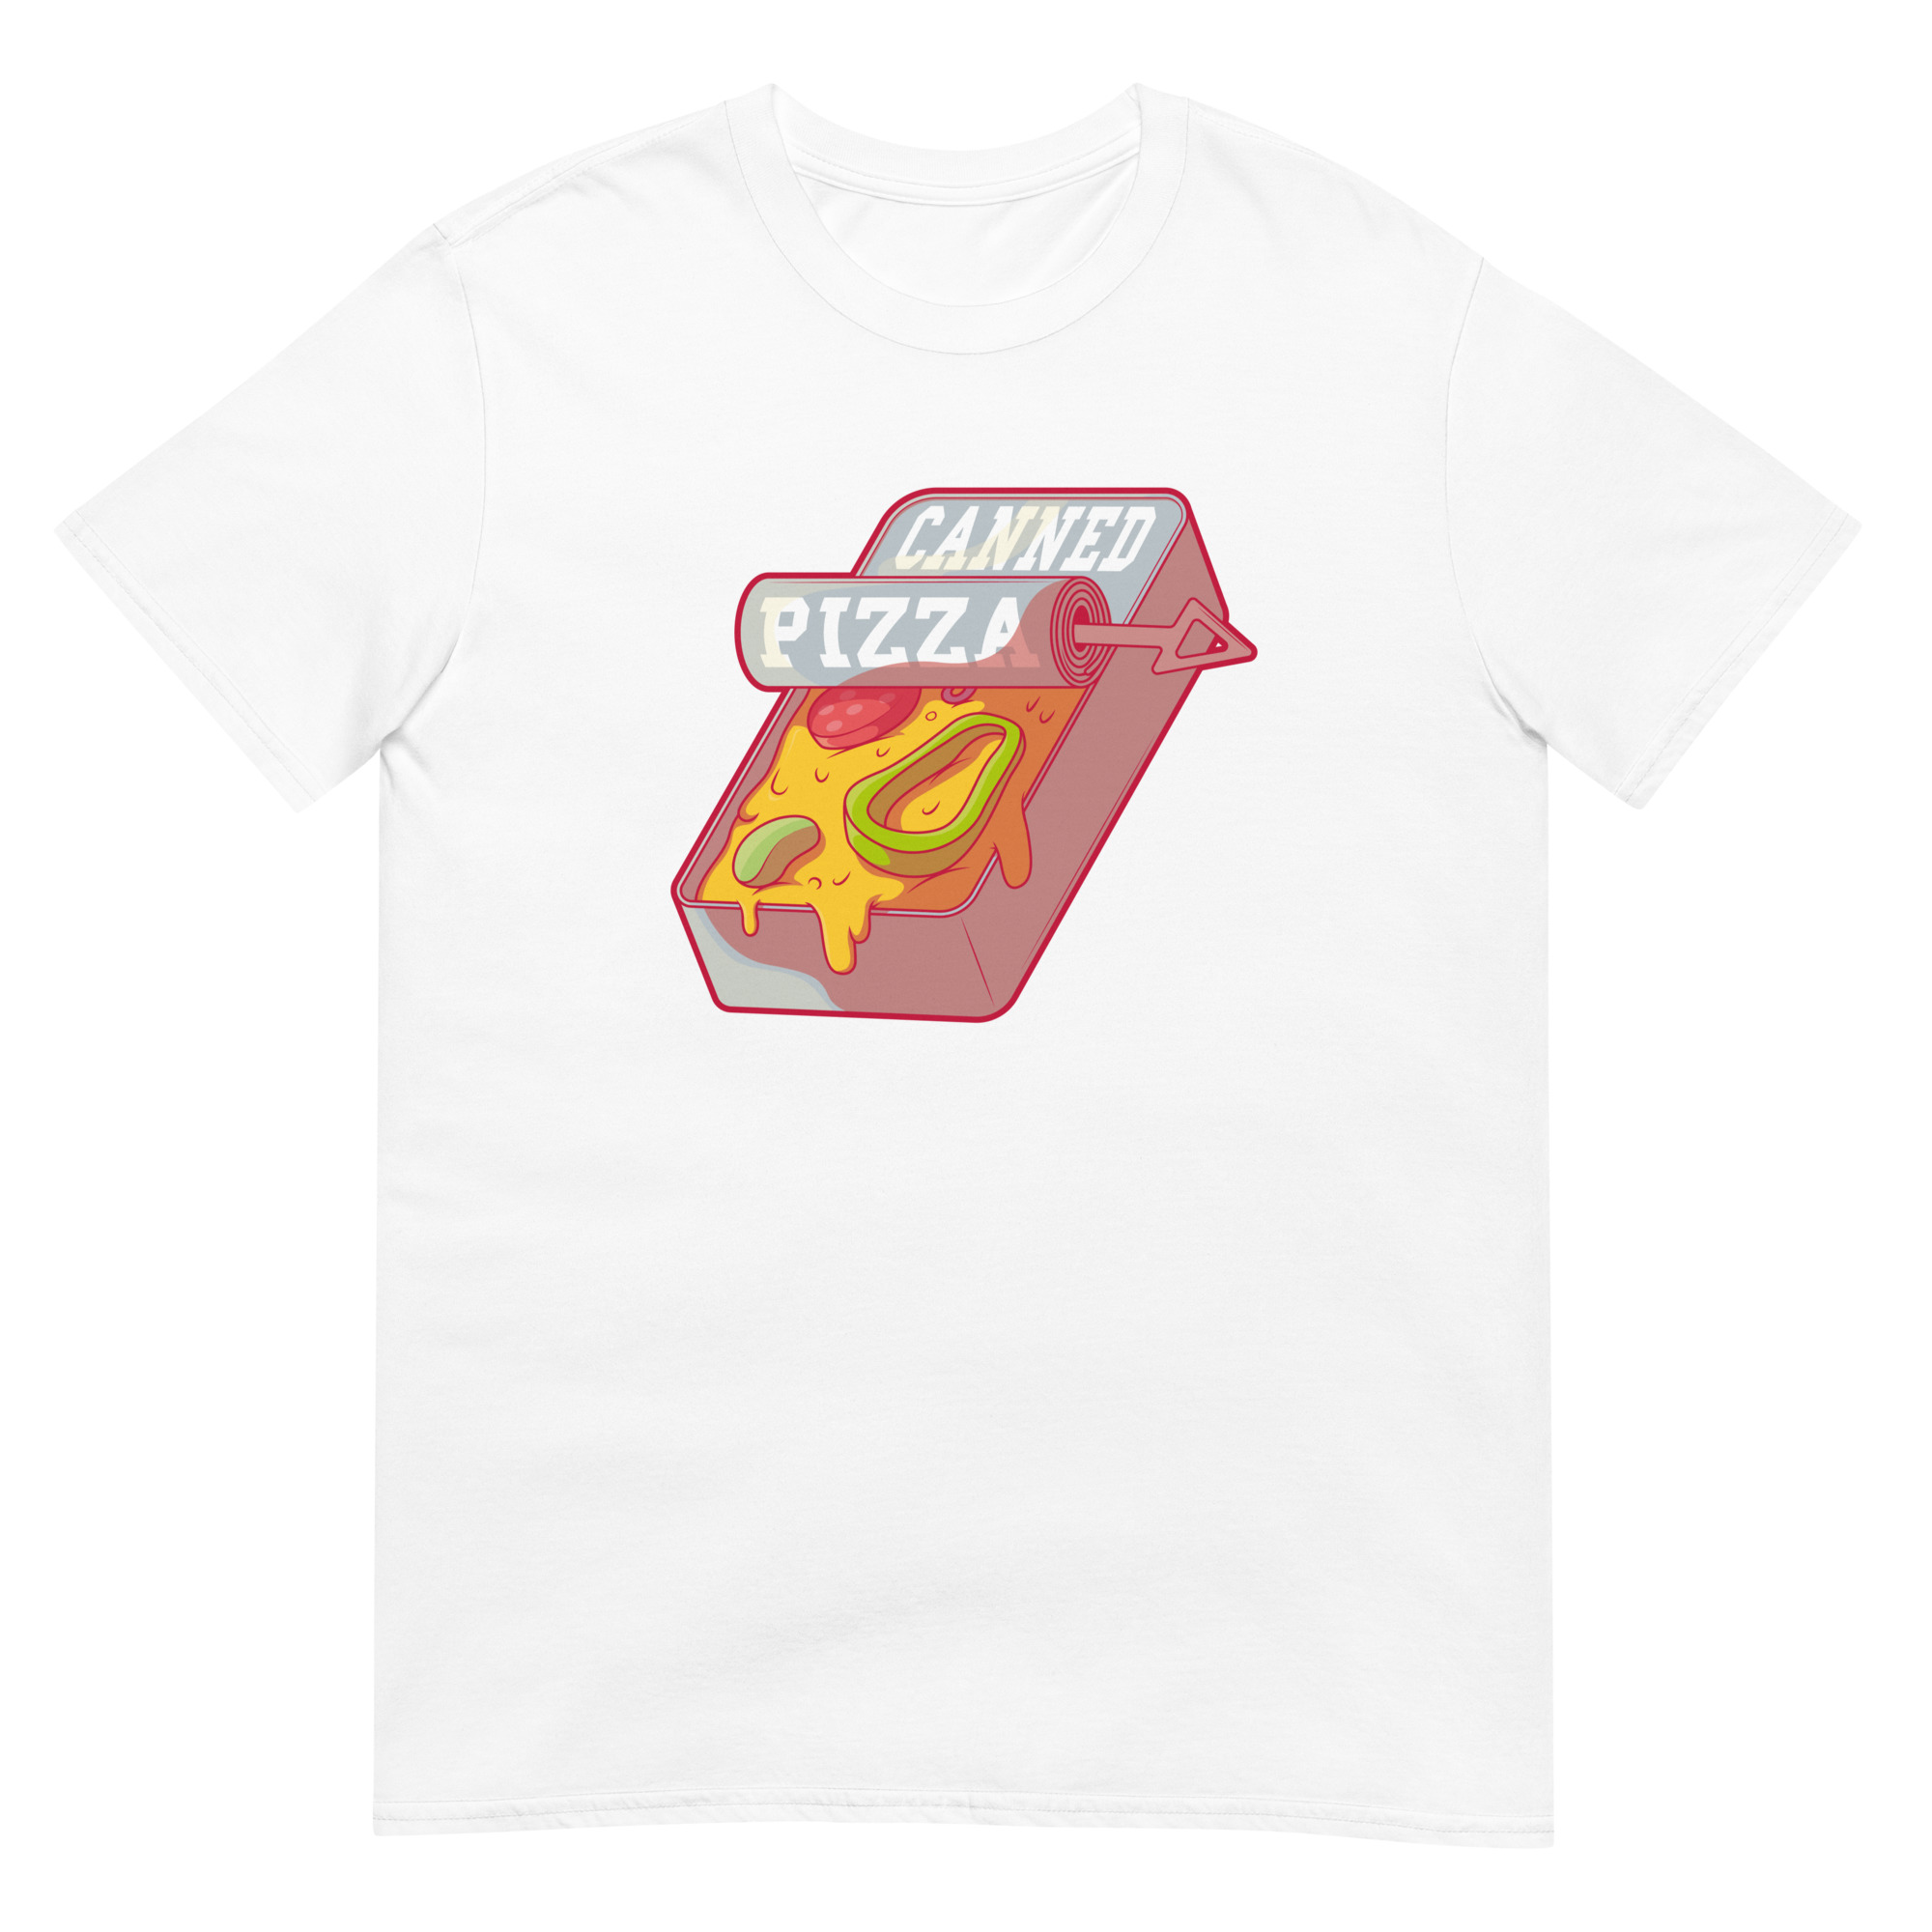 Canned Pizza - Unisex Pizza T-Shirt